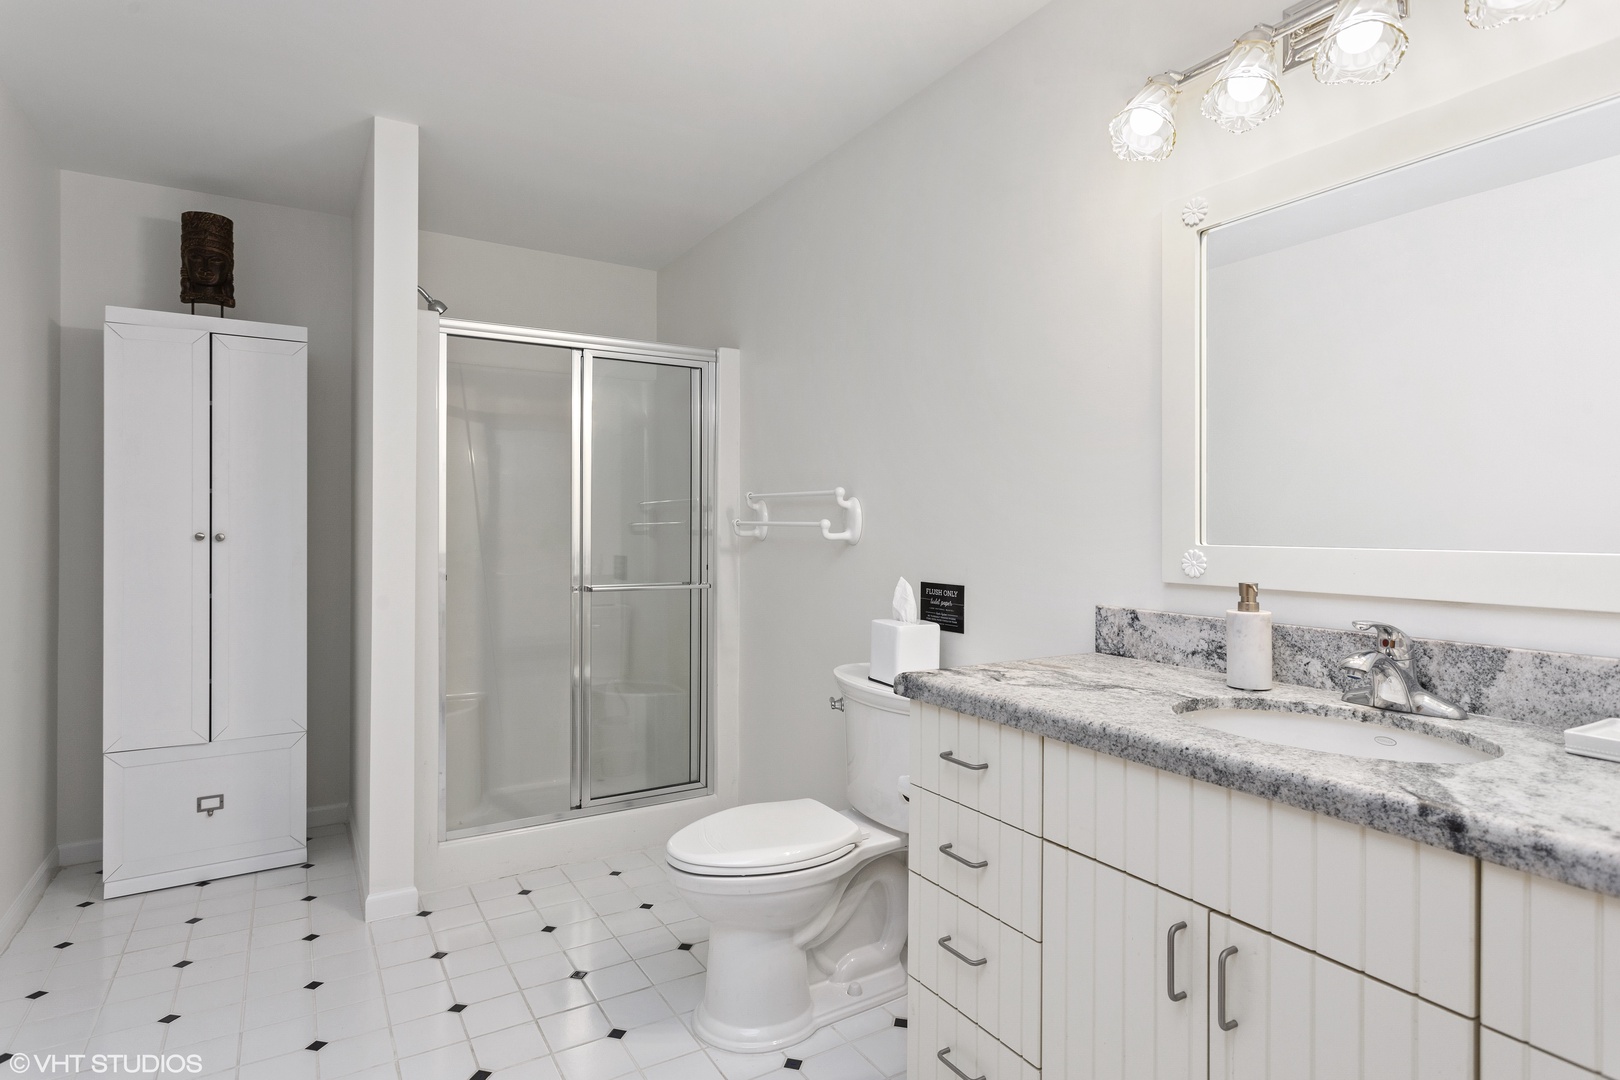 Three full baths are styled with a clean, modern design.